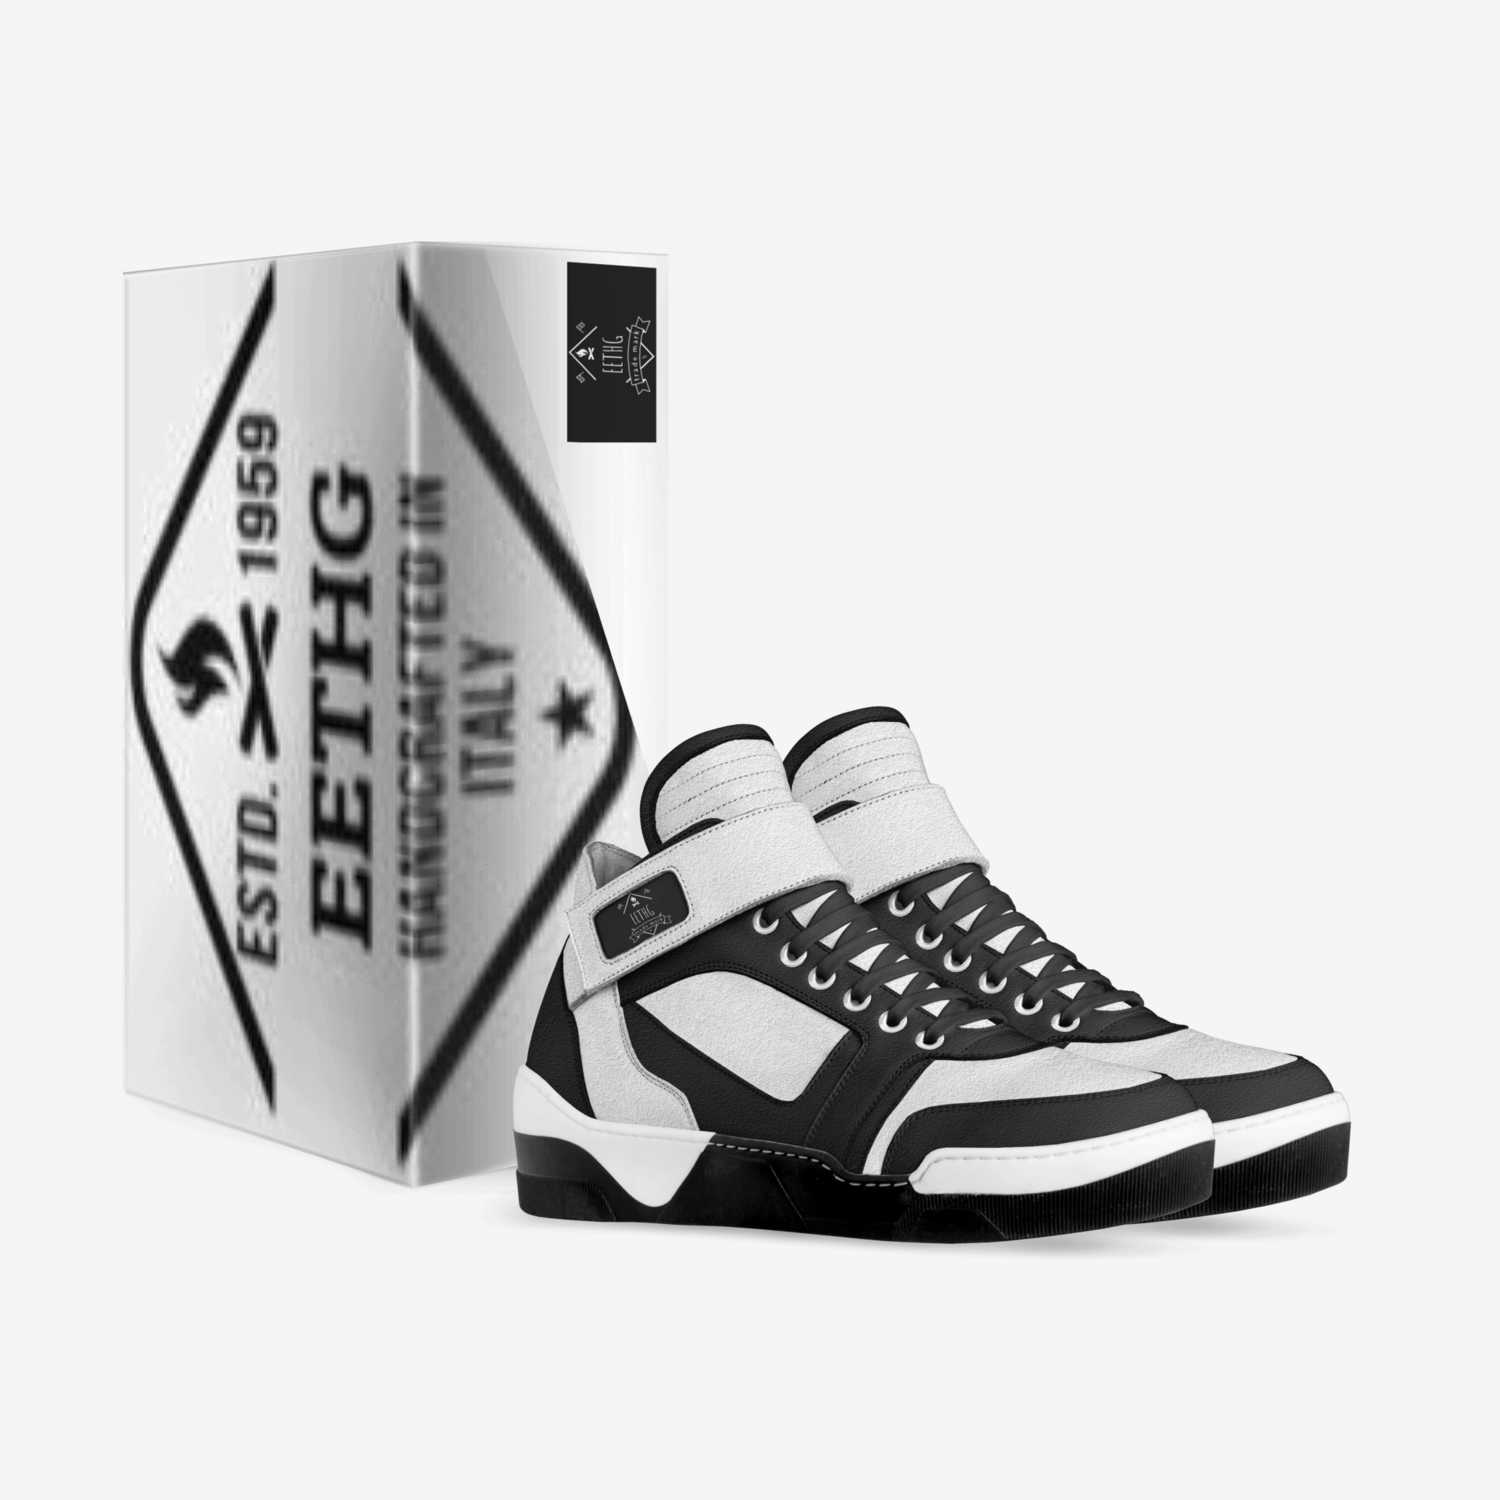 Eethg custom made in Italy shoes by Terrence Herschel Gay | Box view